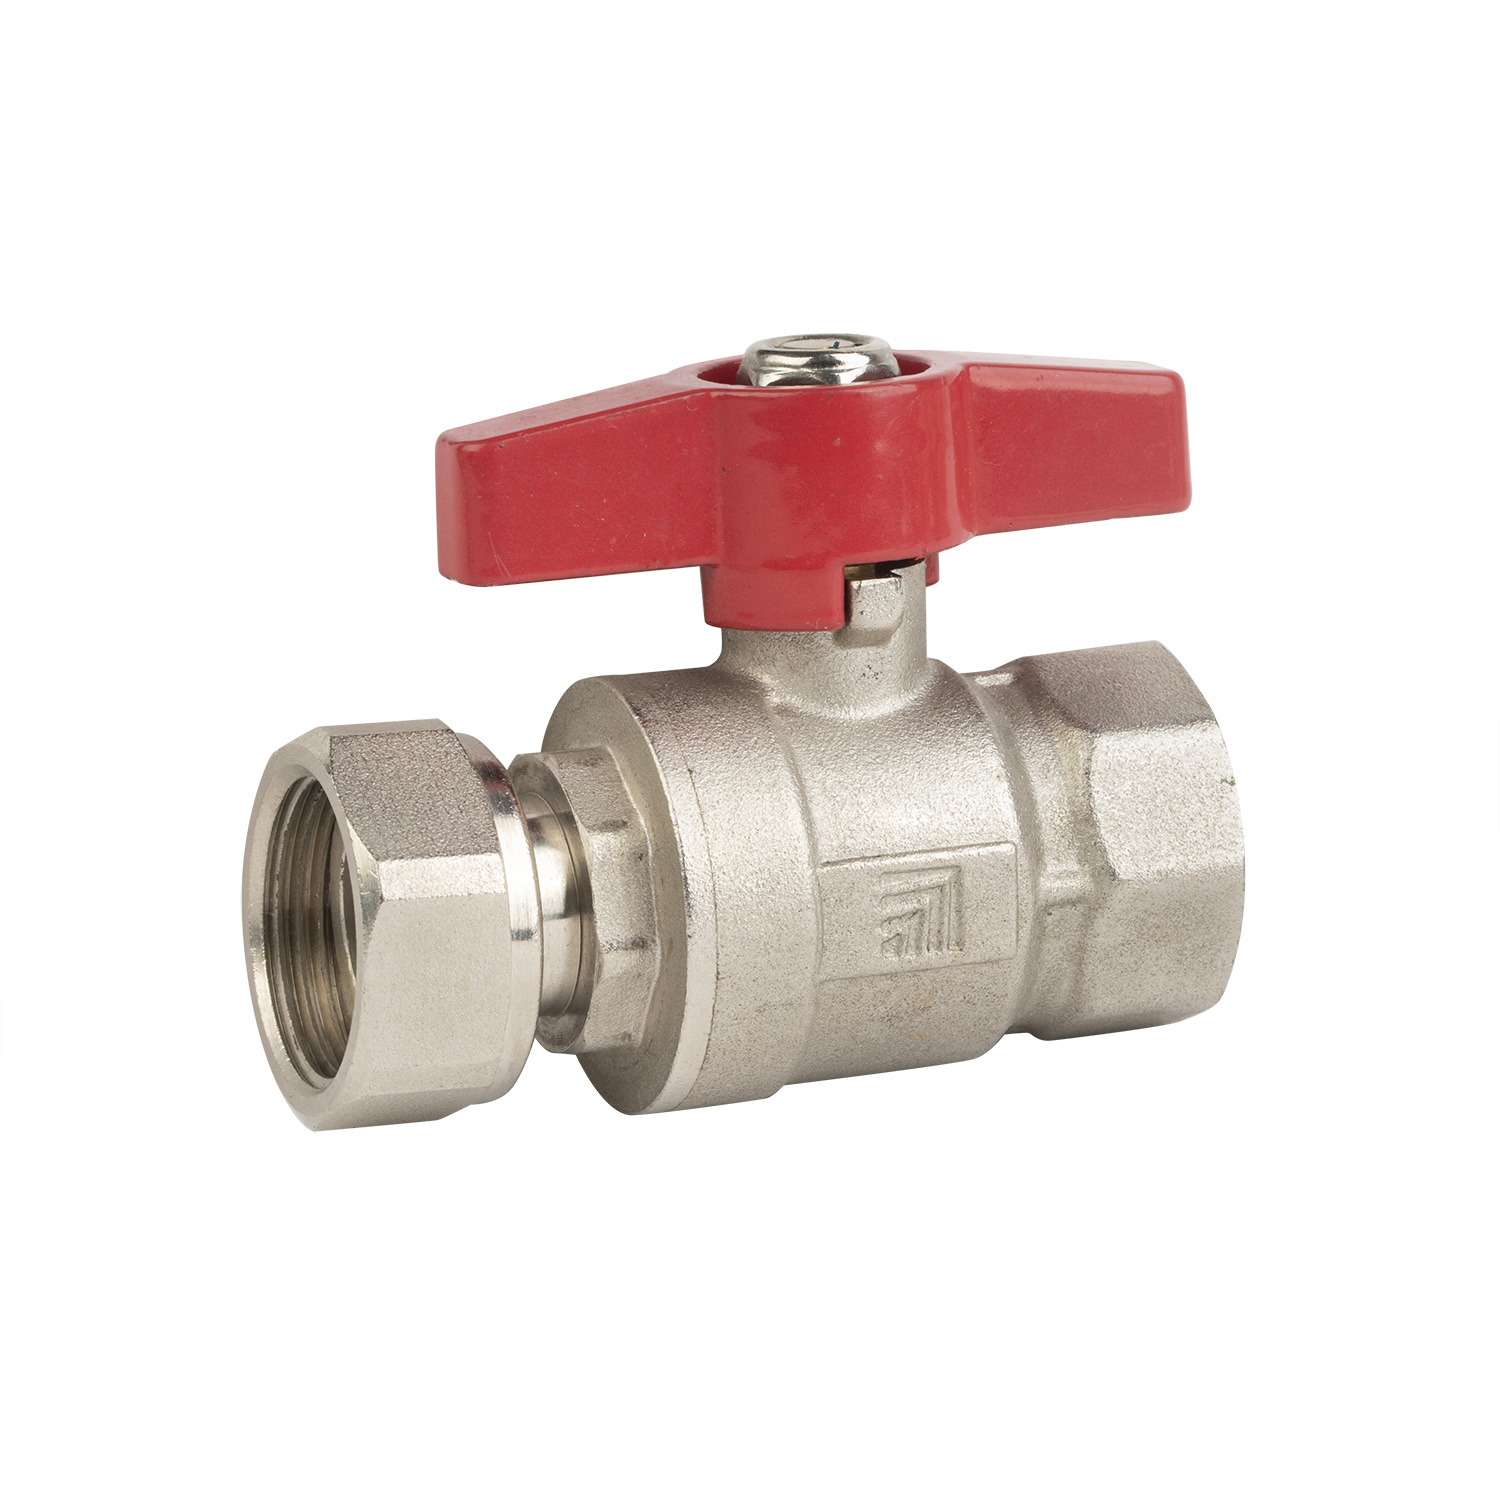 ZS200-1037: Ball Valve With Union 